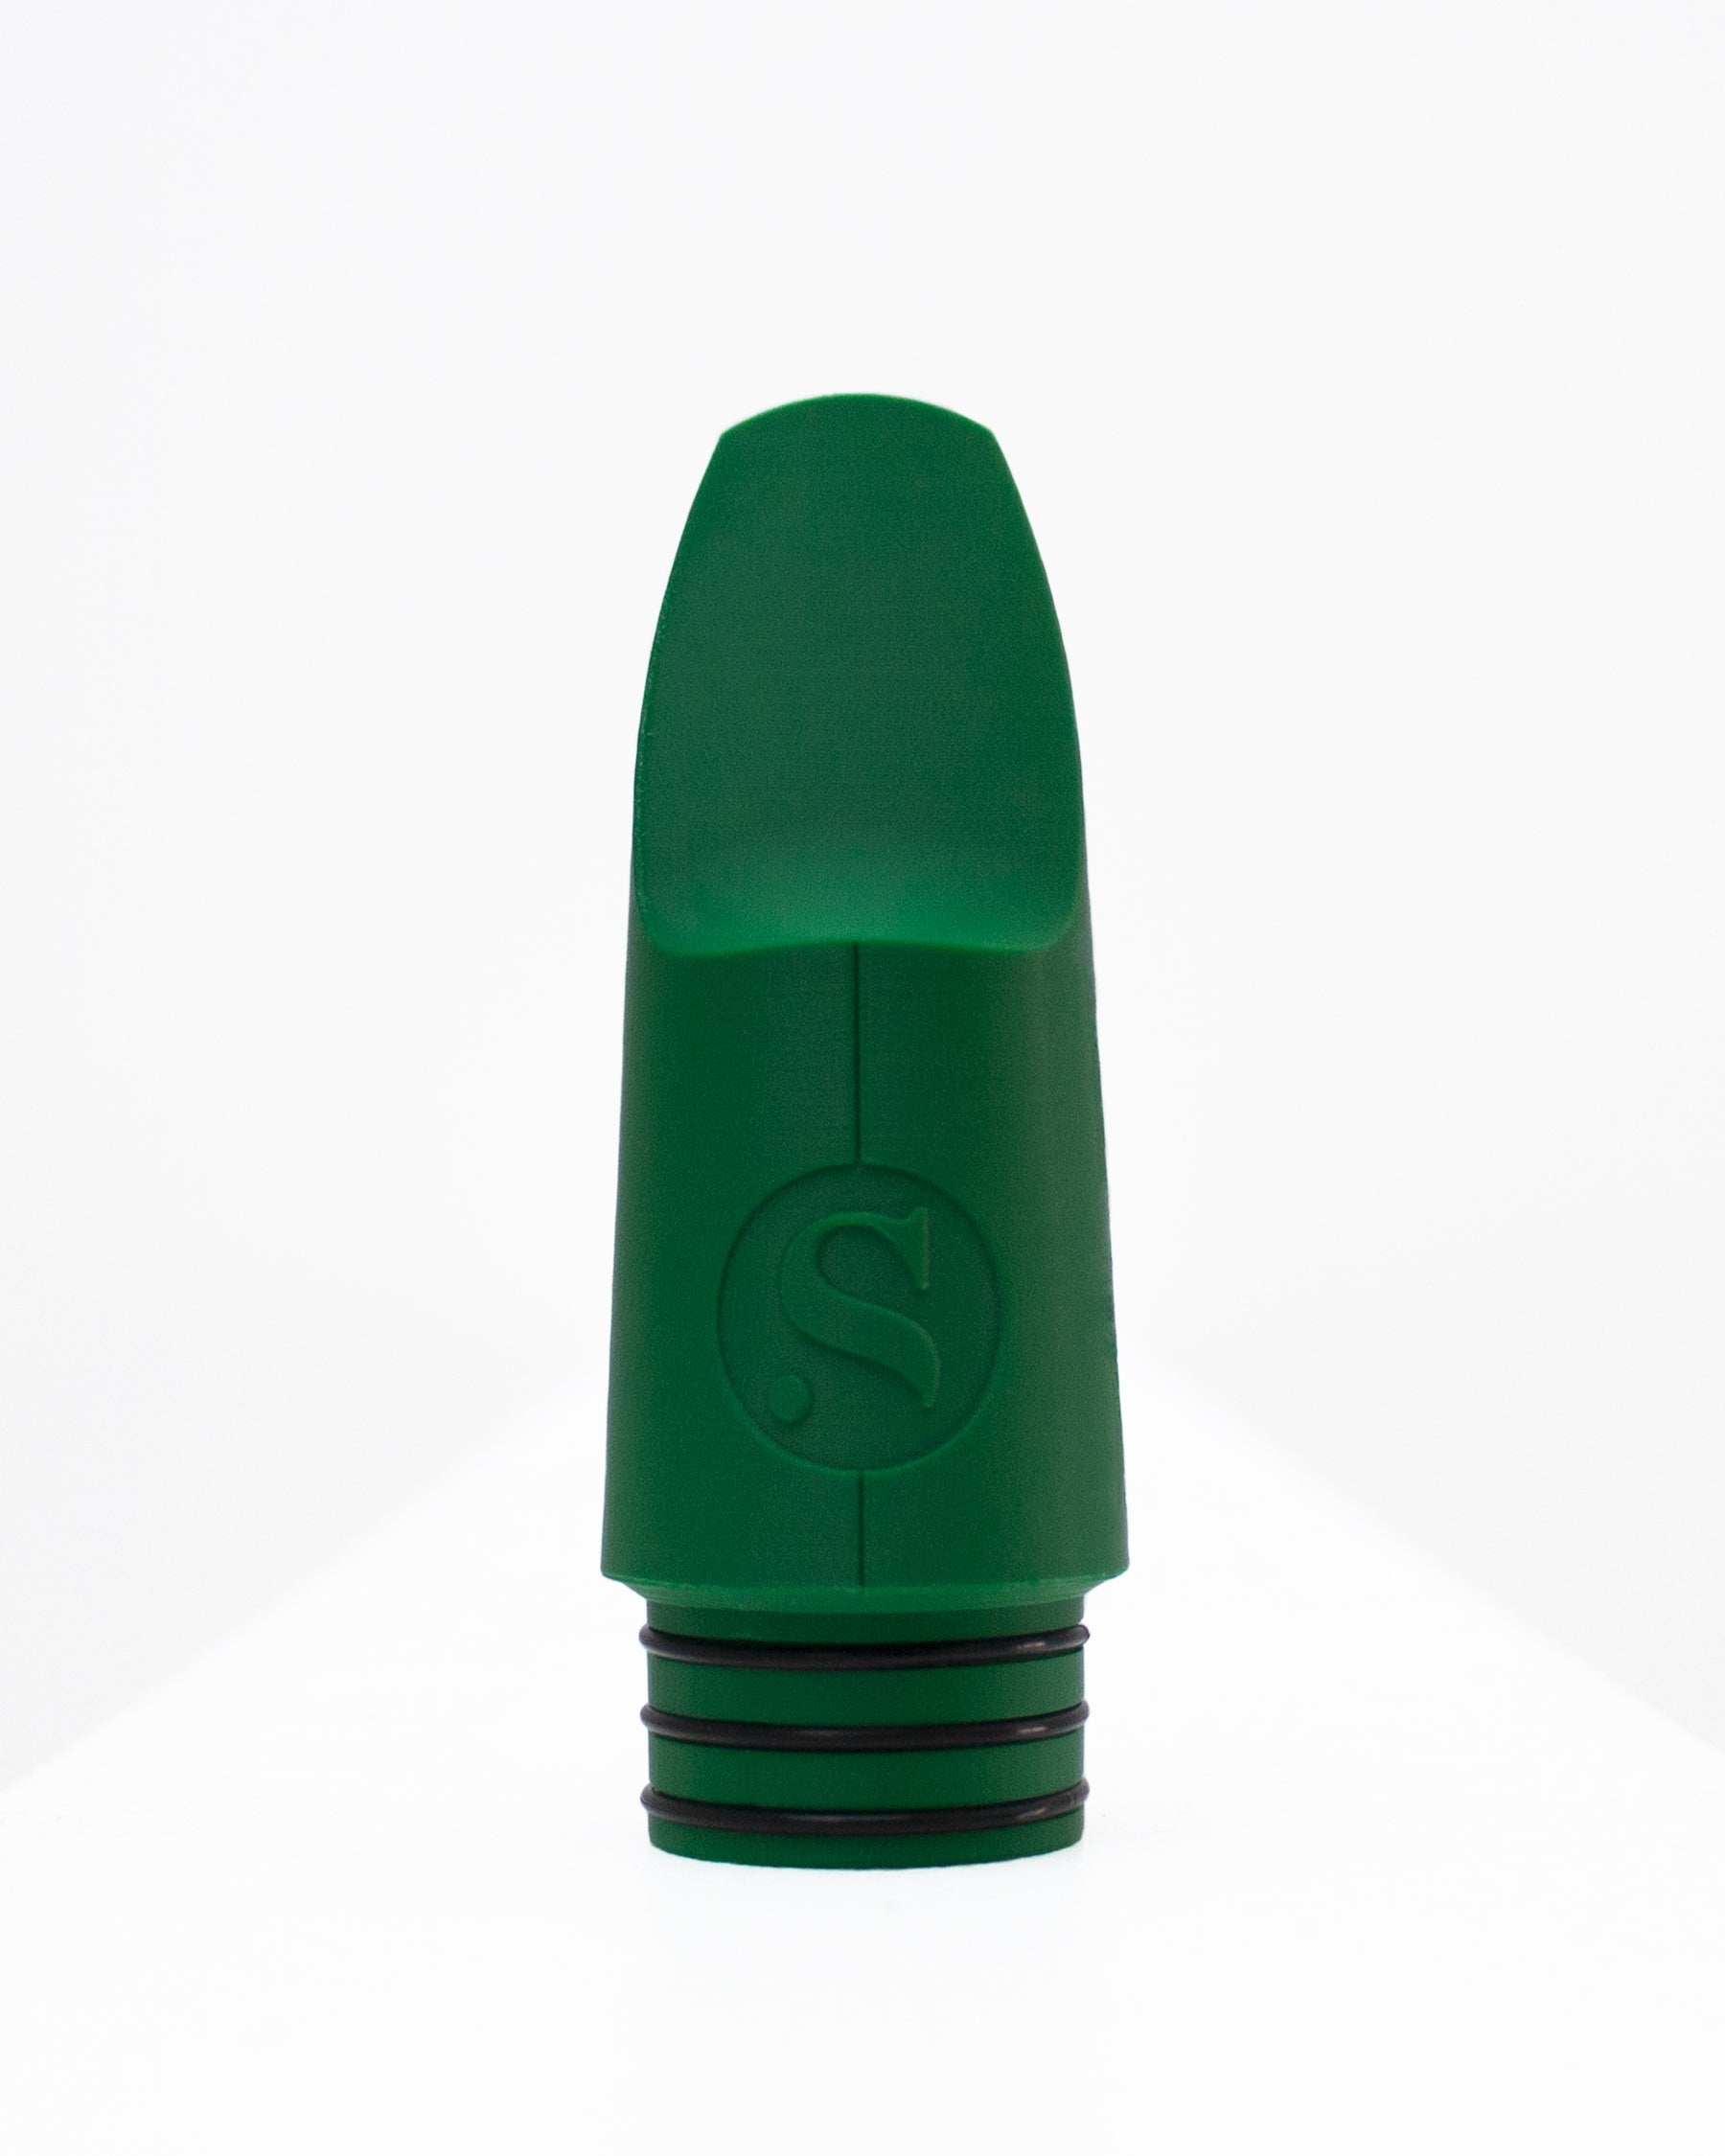 Bass Originals Clarinet mouthpiece - Spark by Syos - 8 / Forest Green